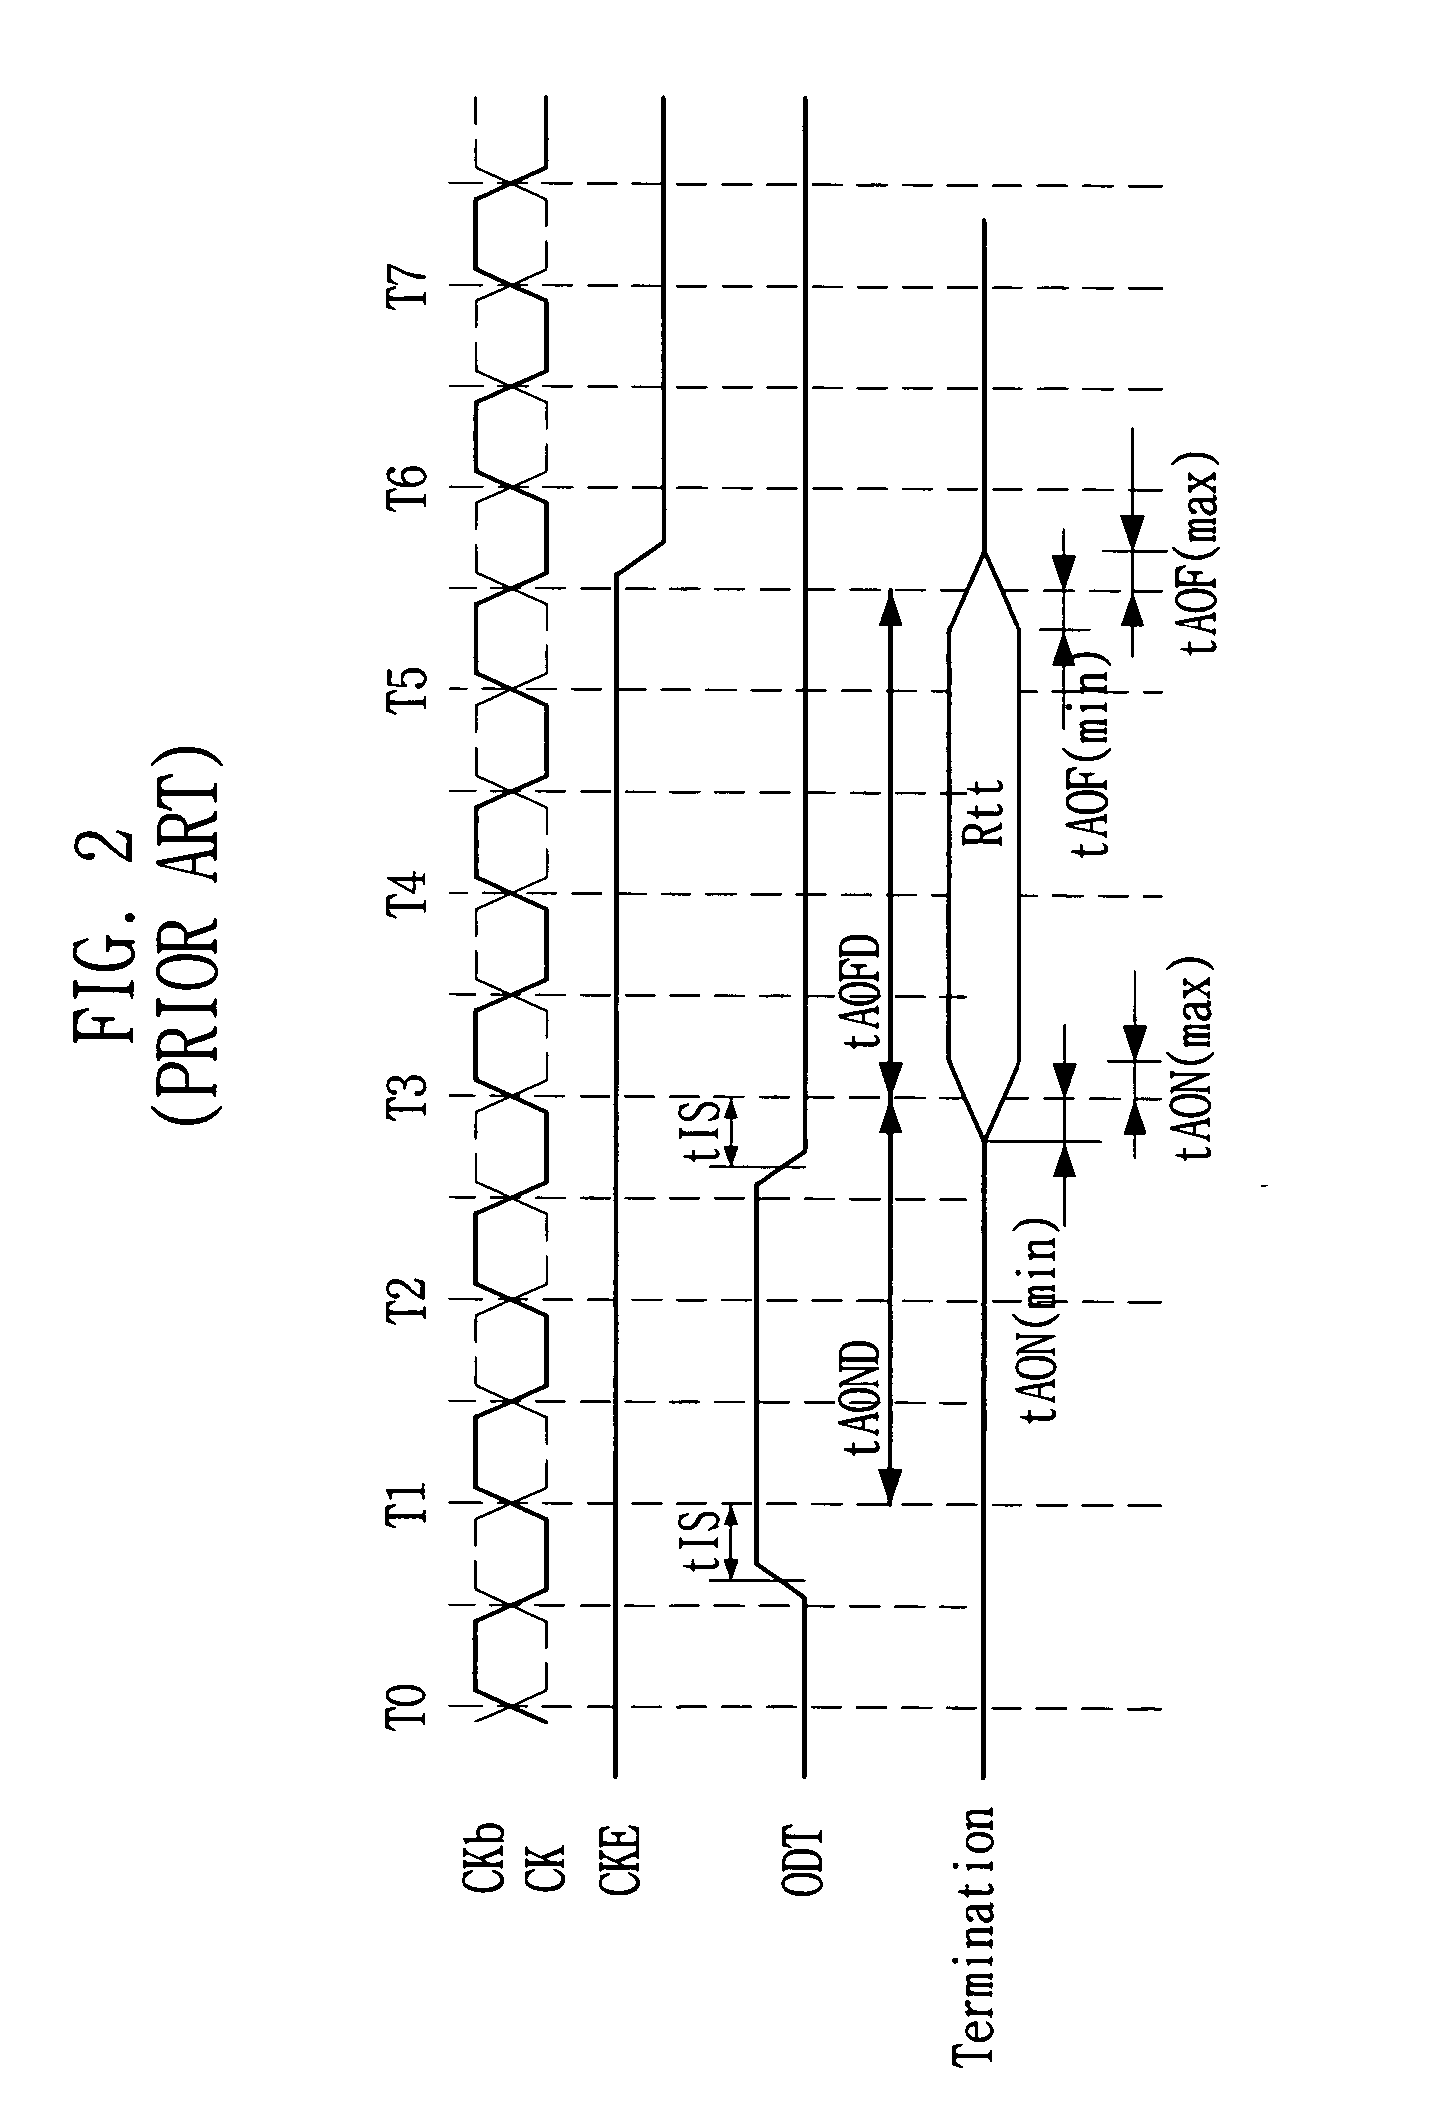 Circiut for performing on-die termination operation in semiconductor memory device and its method